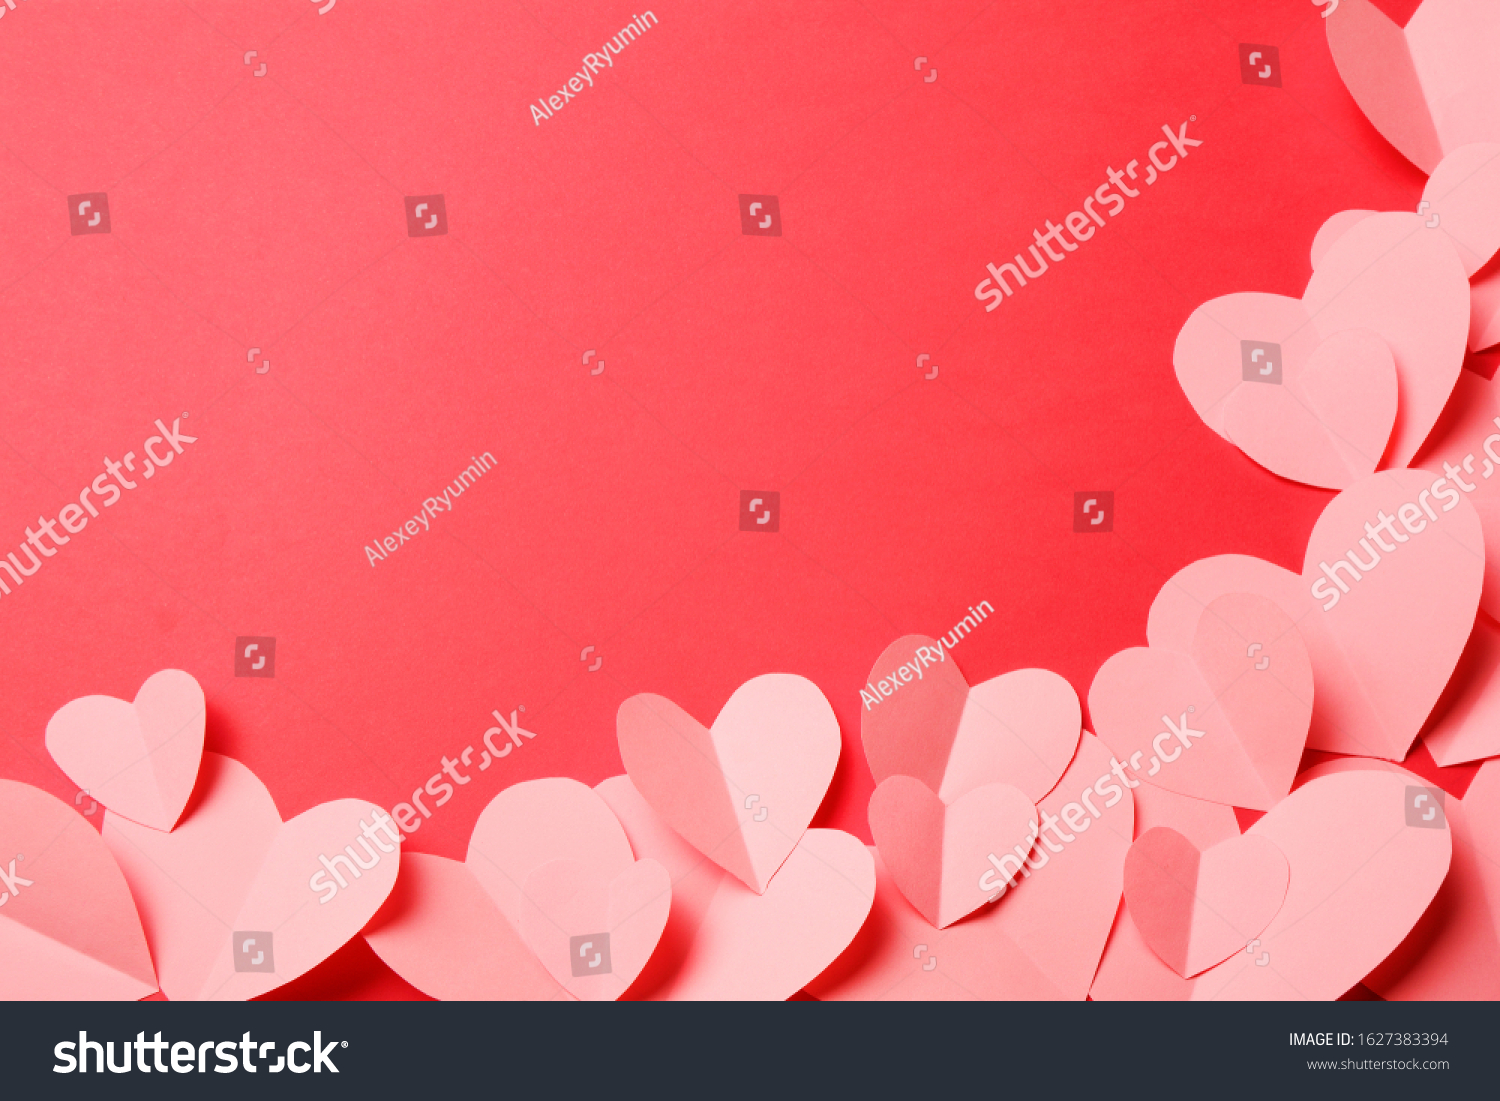 Cut out of pink paper hearts on red background. Good Valentines day, Womans day, love, romantic or wedding composition with copy space for your text for banner, congratulation, card, offer, flyer, advertising, invitation.